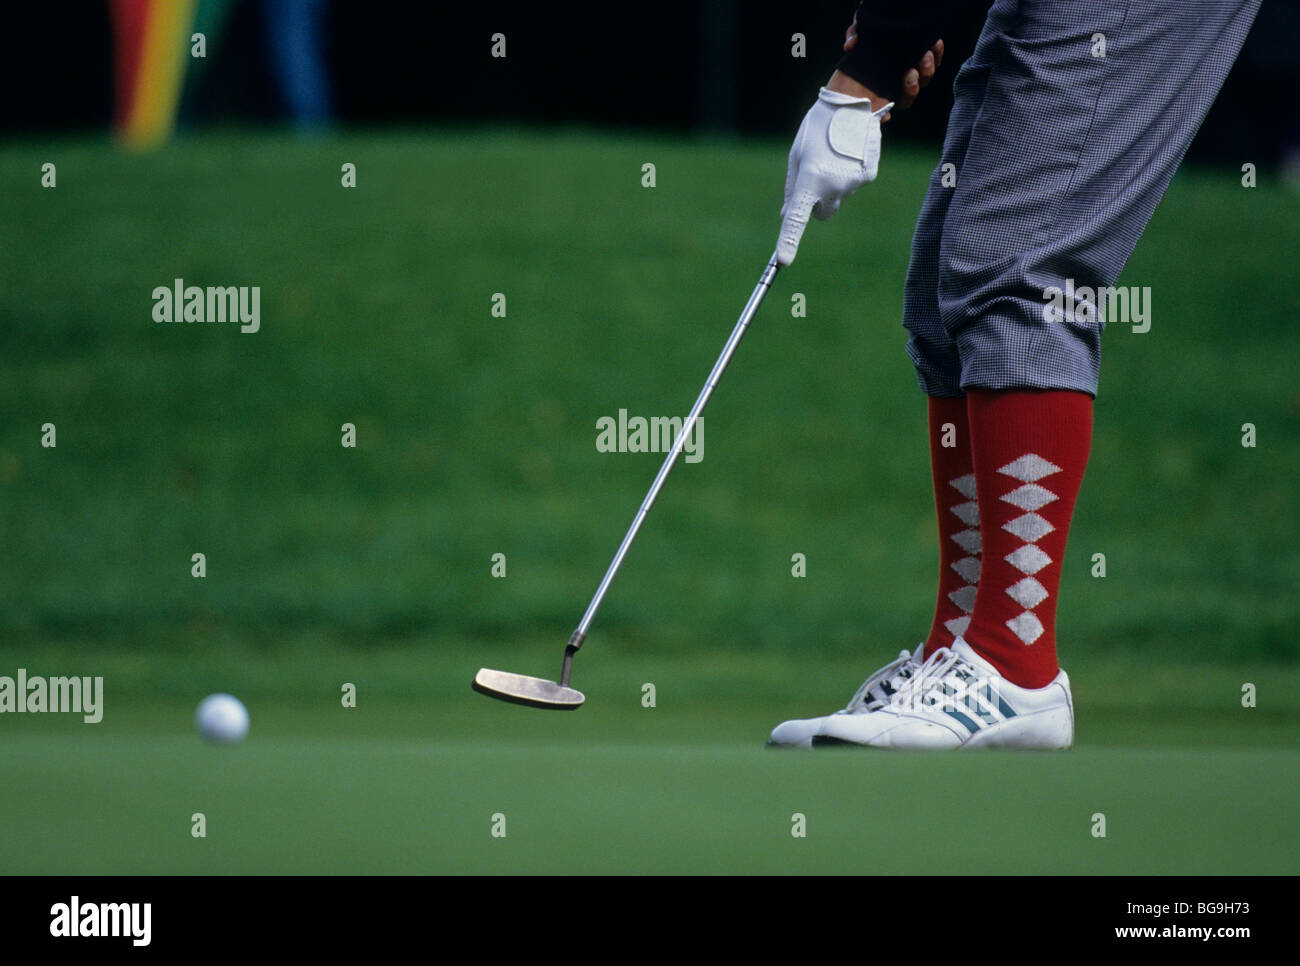 Golfer in plus fours putting a shot Stock Photo